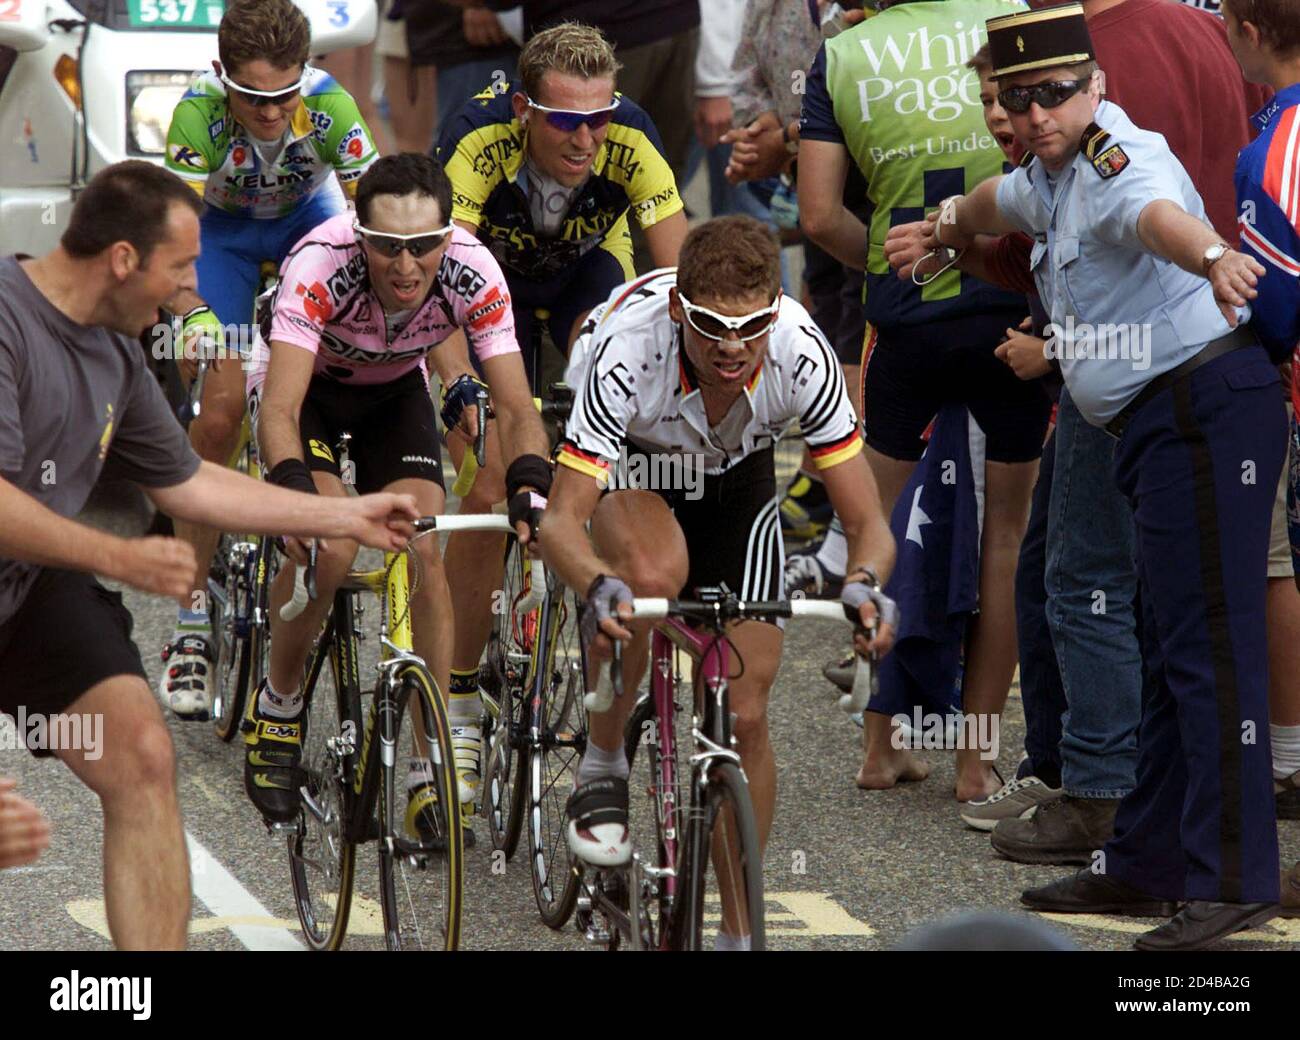 Deutsche Telekom rider Jan Ullrich leads the pack in the climb of L'Alpe  d'Huez during the 10th stage of the Tour de France cycling race between  Aix-Les-Bains and L'Alpe d'Huez July 17,